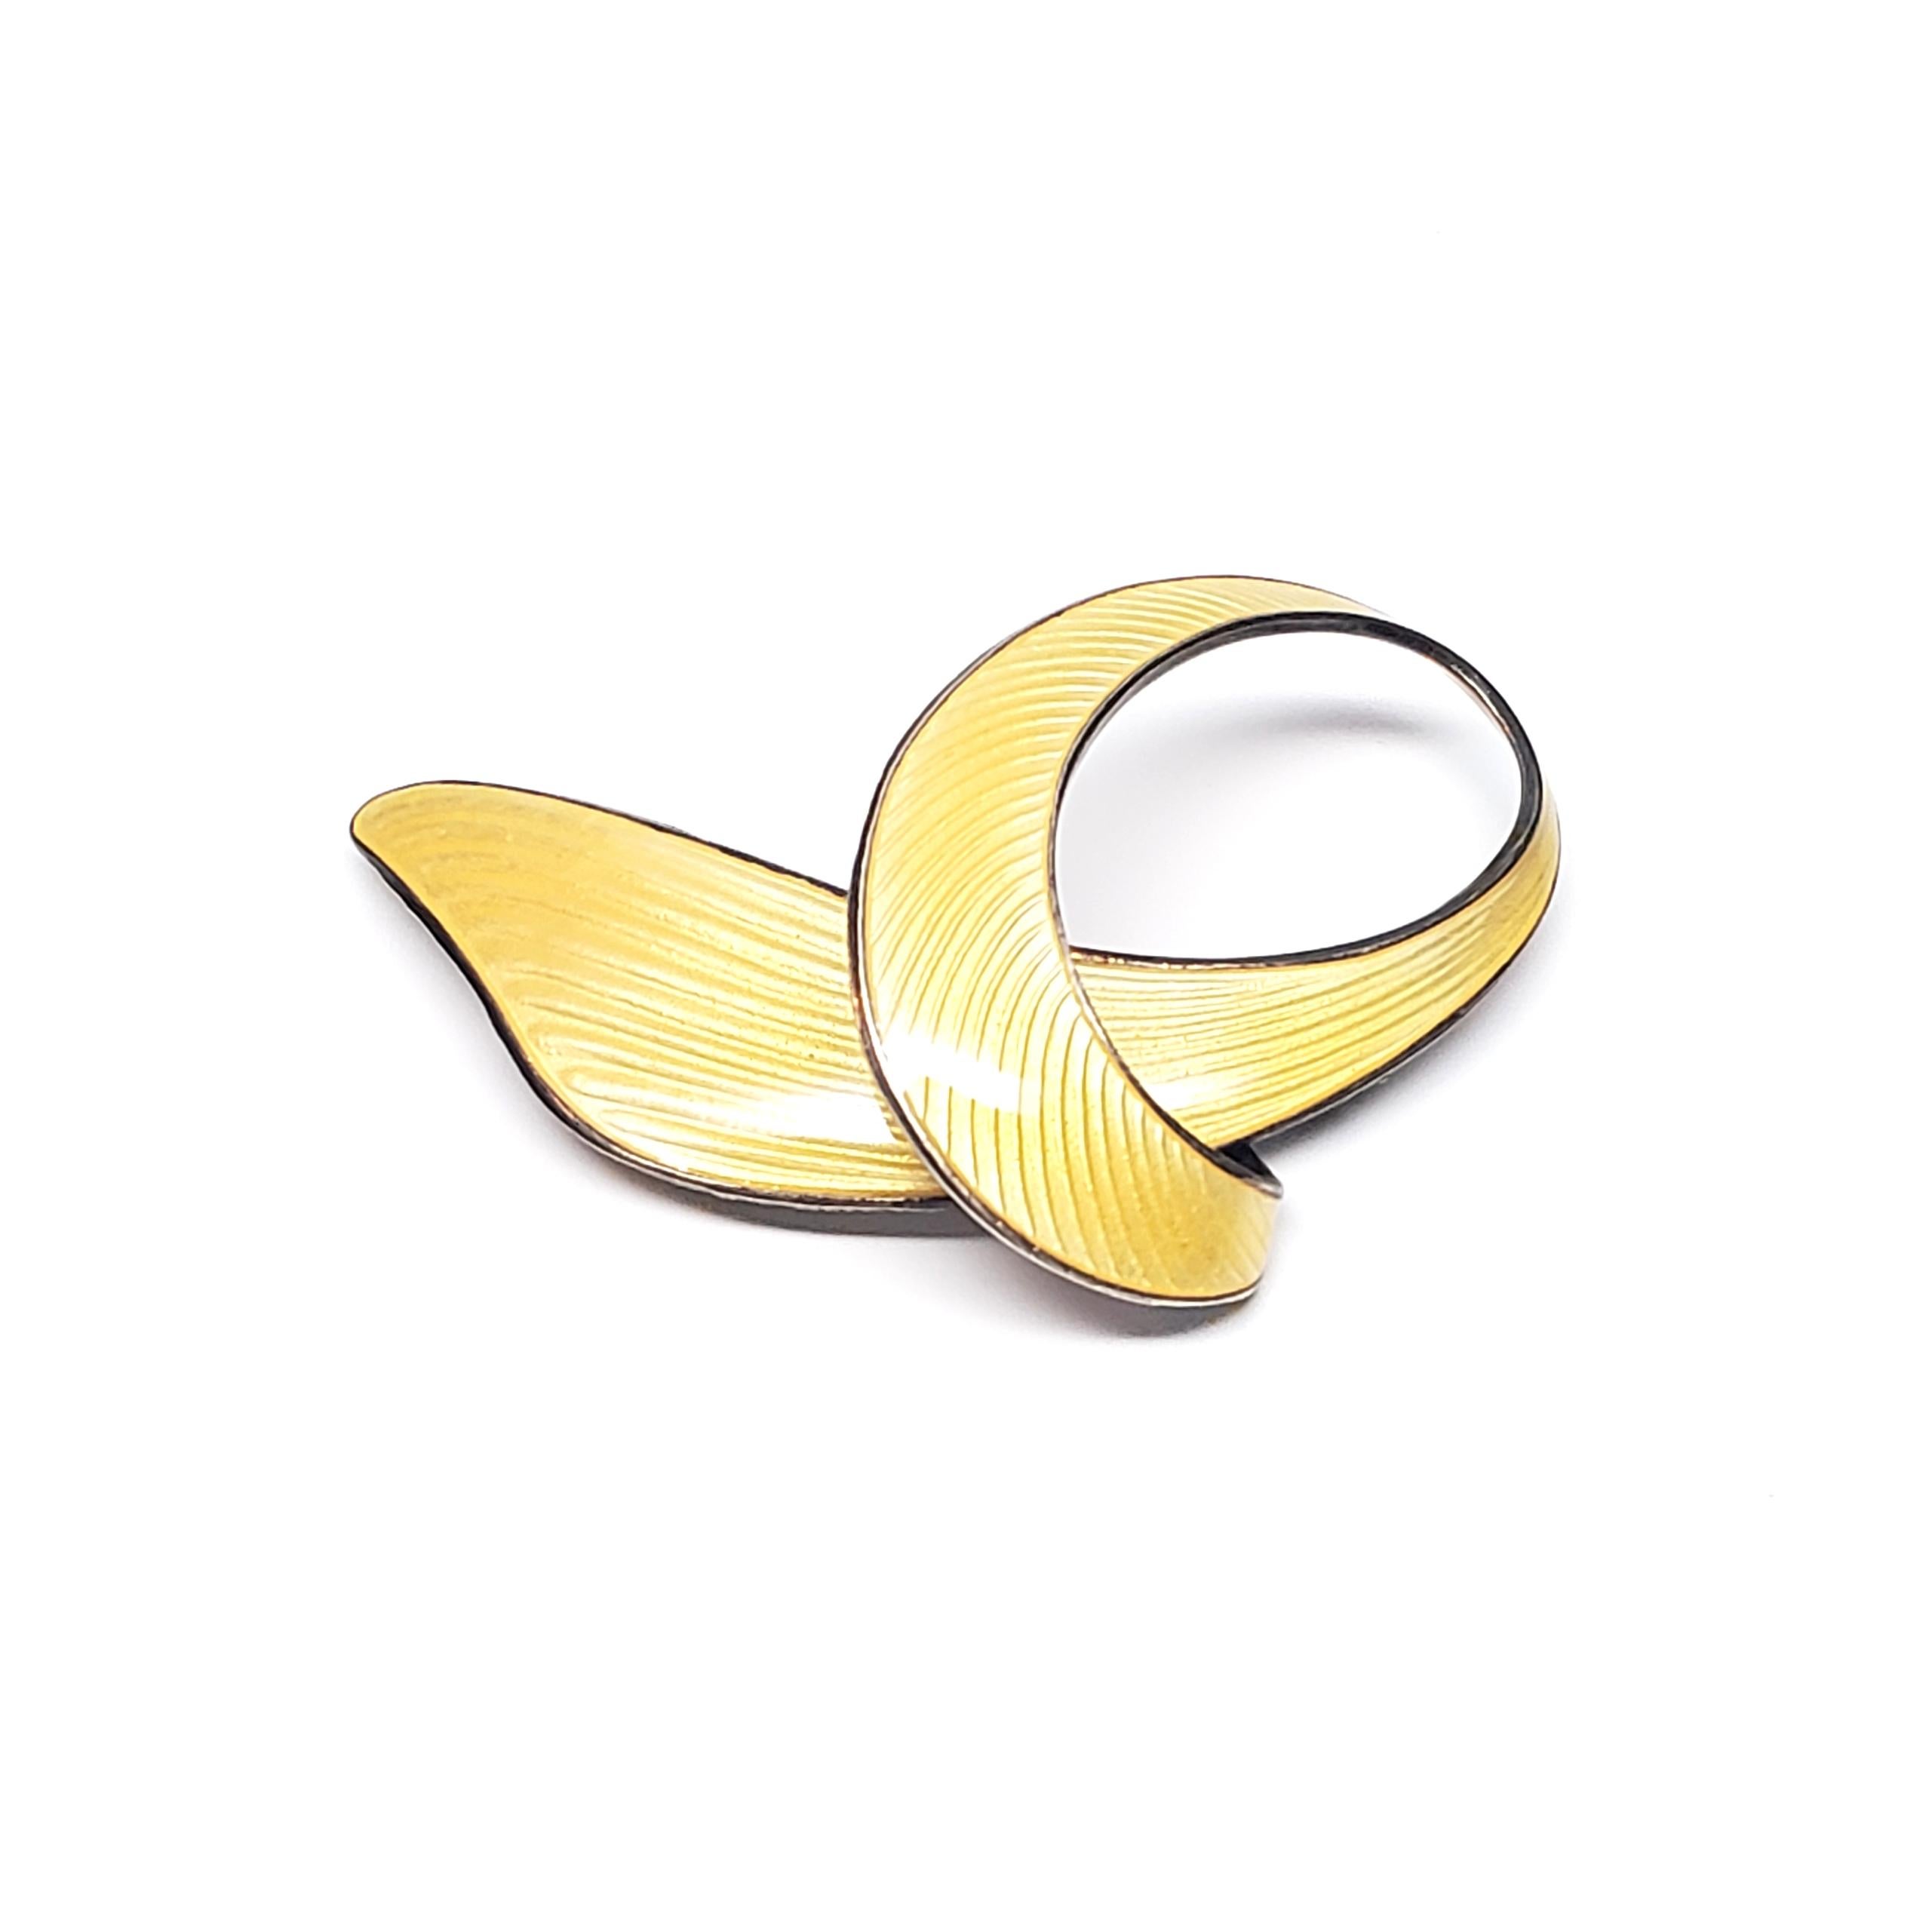 Vintage gold vermeil over sterling silver yellow guilloche enamel ribbon pin by Finn Jensen.

CL04012020

This mid-century design pin has beautiful guilloche enamel design with a gold wash. It is a beautiful example of Finn Jensen's high quality